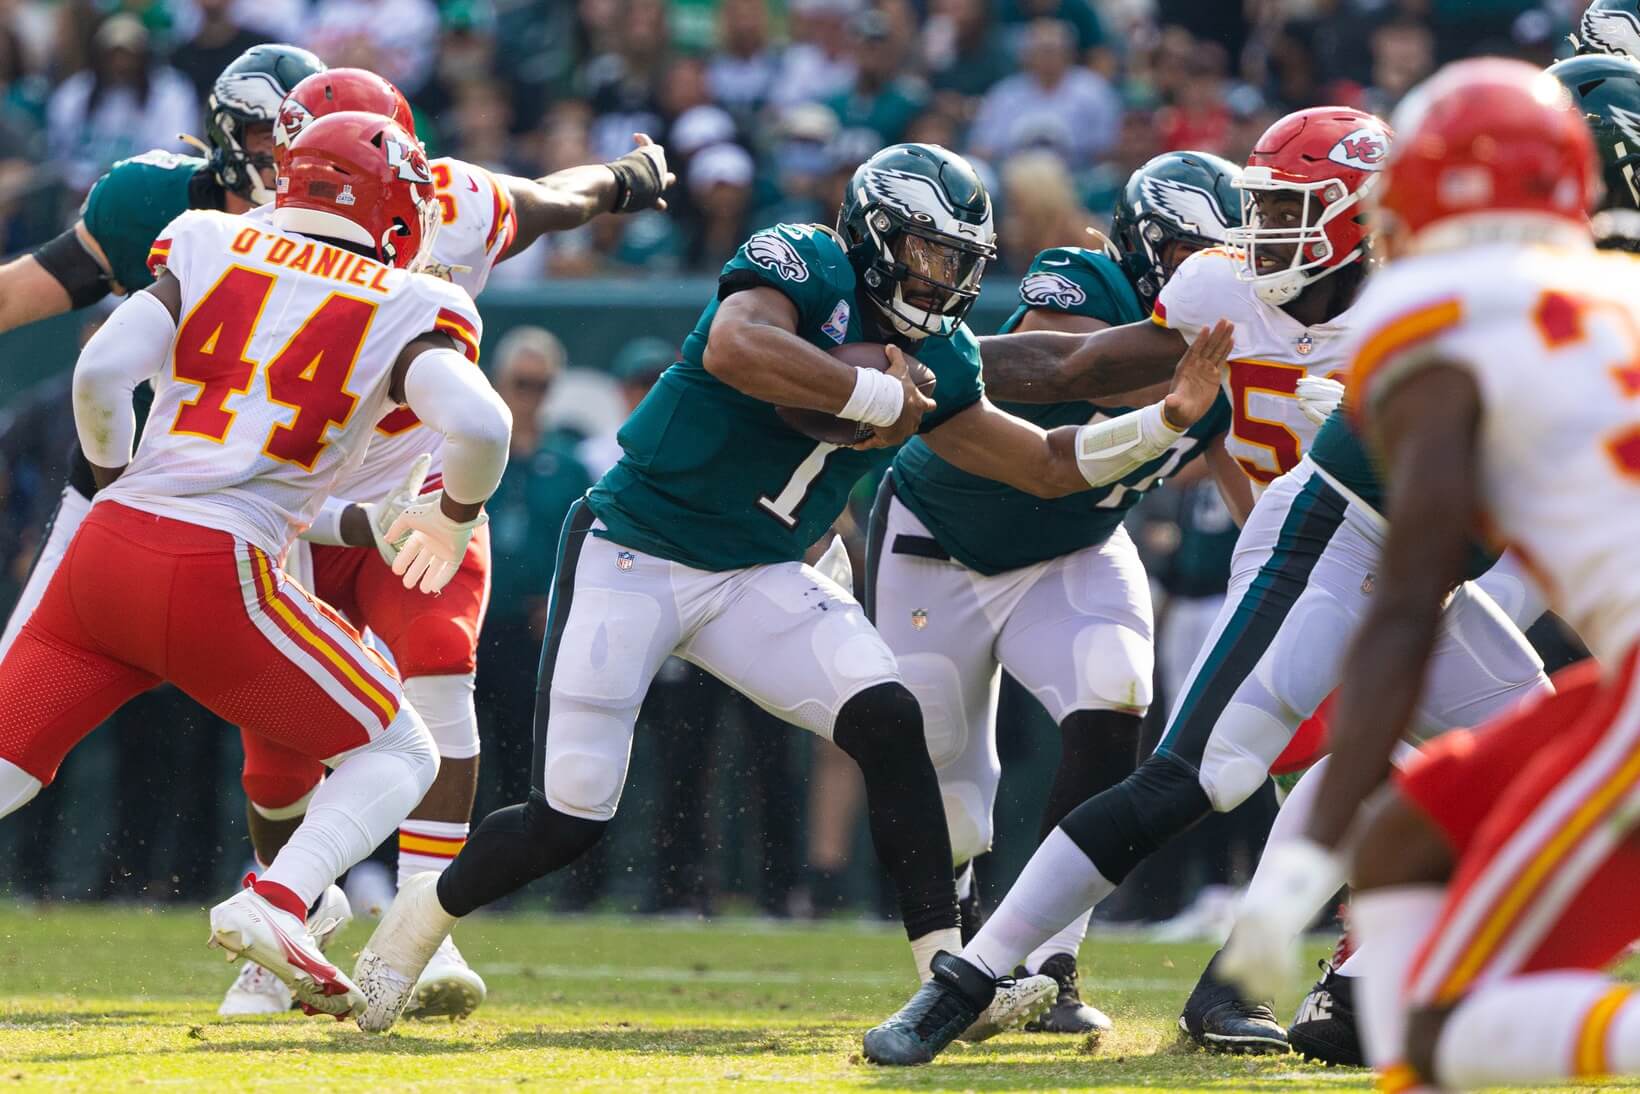 Philadelphia Eagles quarterback Jalen Hurts (1) runs with the ball against the Kansas City Chiefs during the fourth quarter at Lincoln Financial Field.